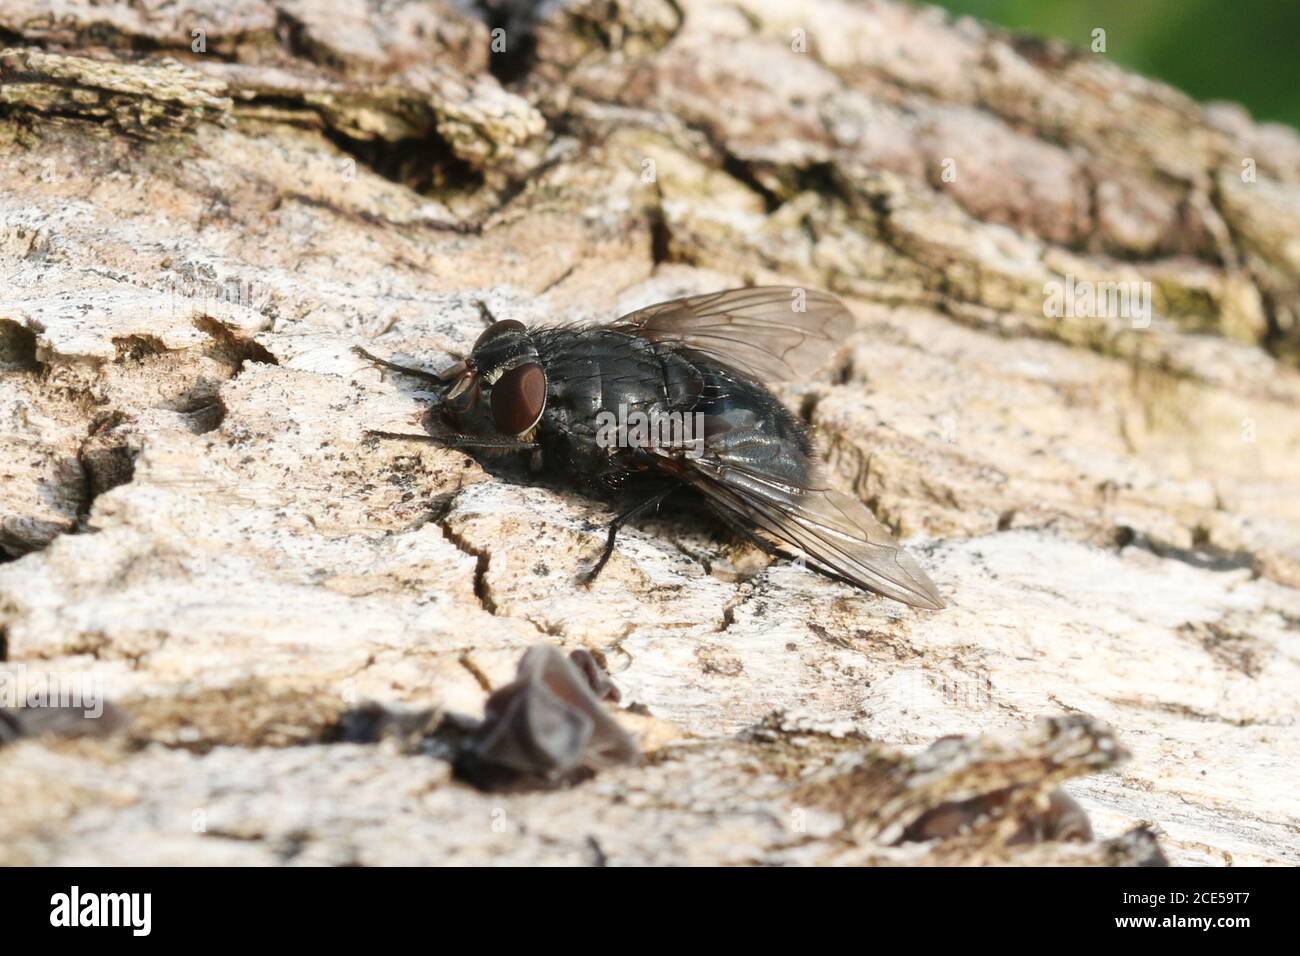 A female Calliphora vomitoria, a species of blow fly commonly referred to as a Bluebottle, at Hunterston in Ayrshire. Stock Photo